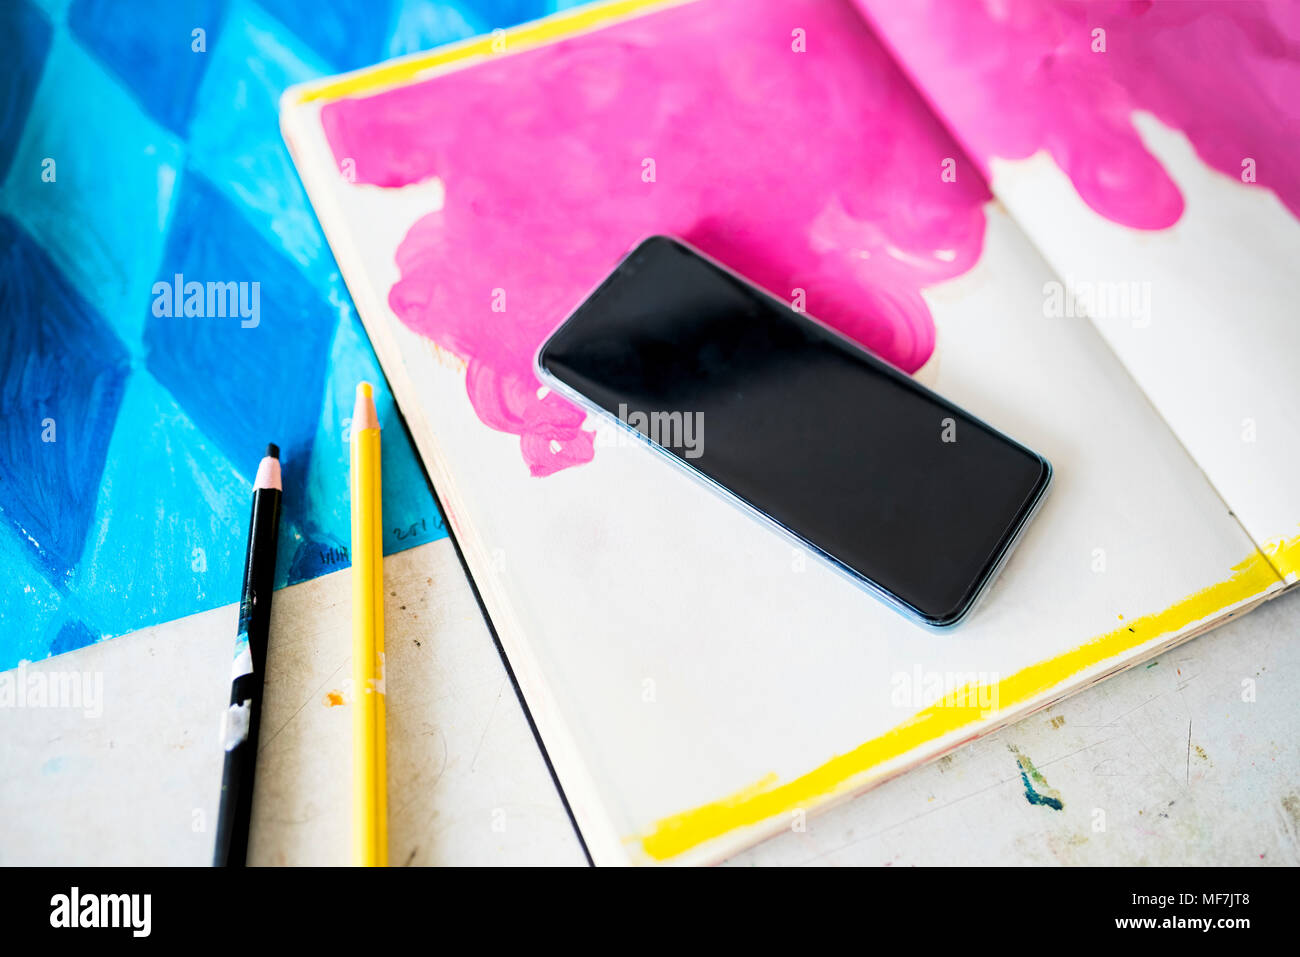 Smartphone lying on a notebook with a pink drawing in artist's studio Stock Photo